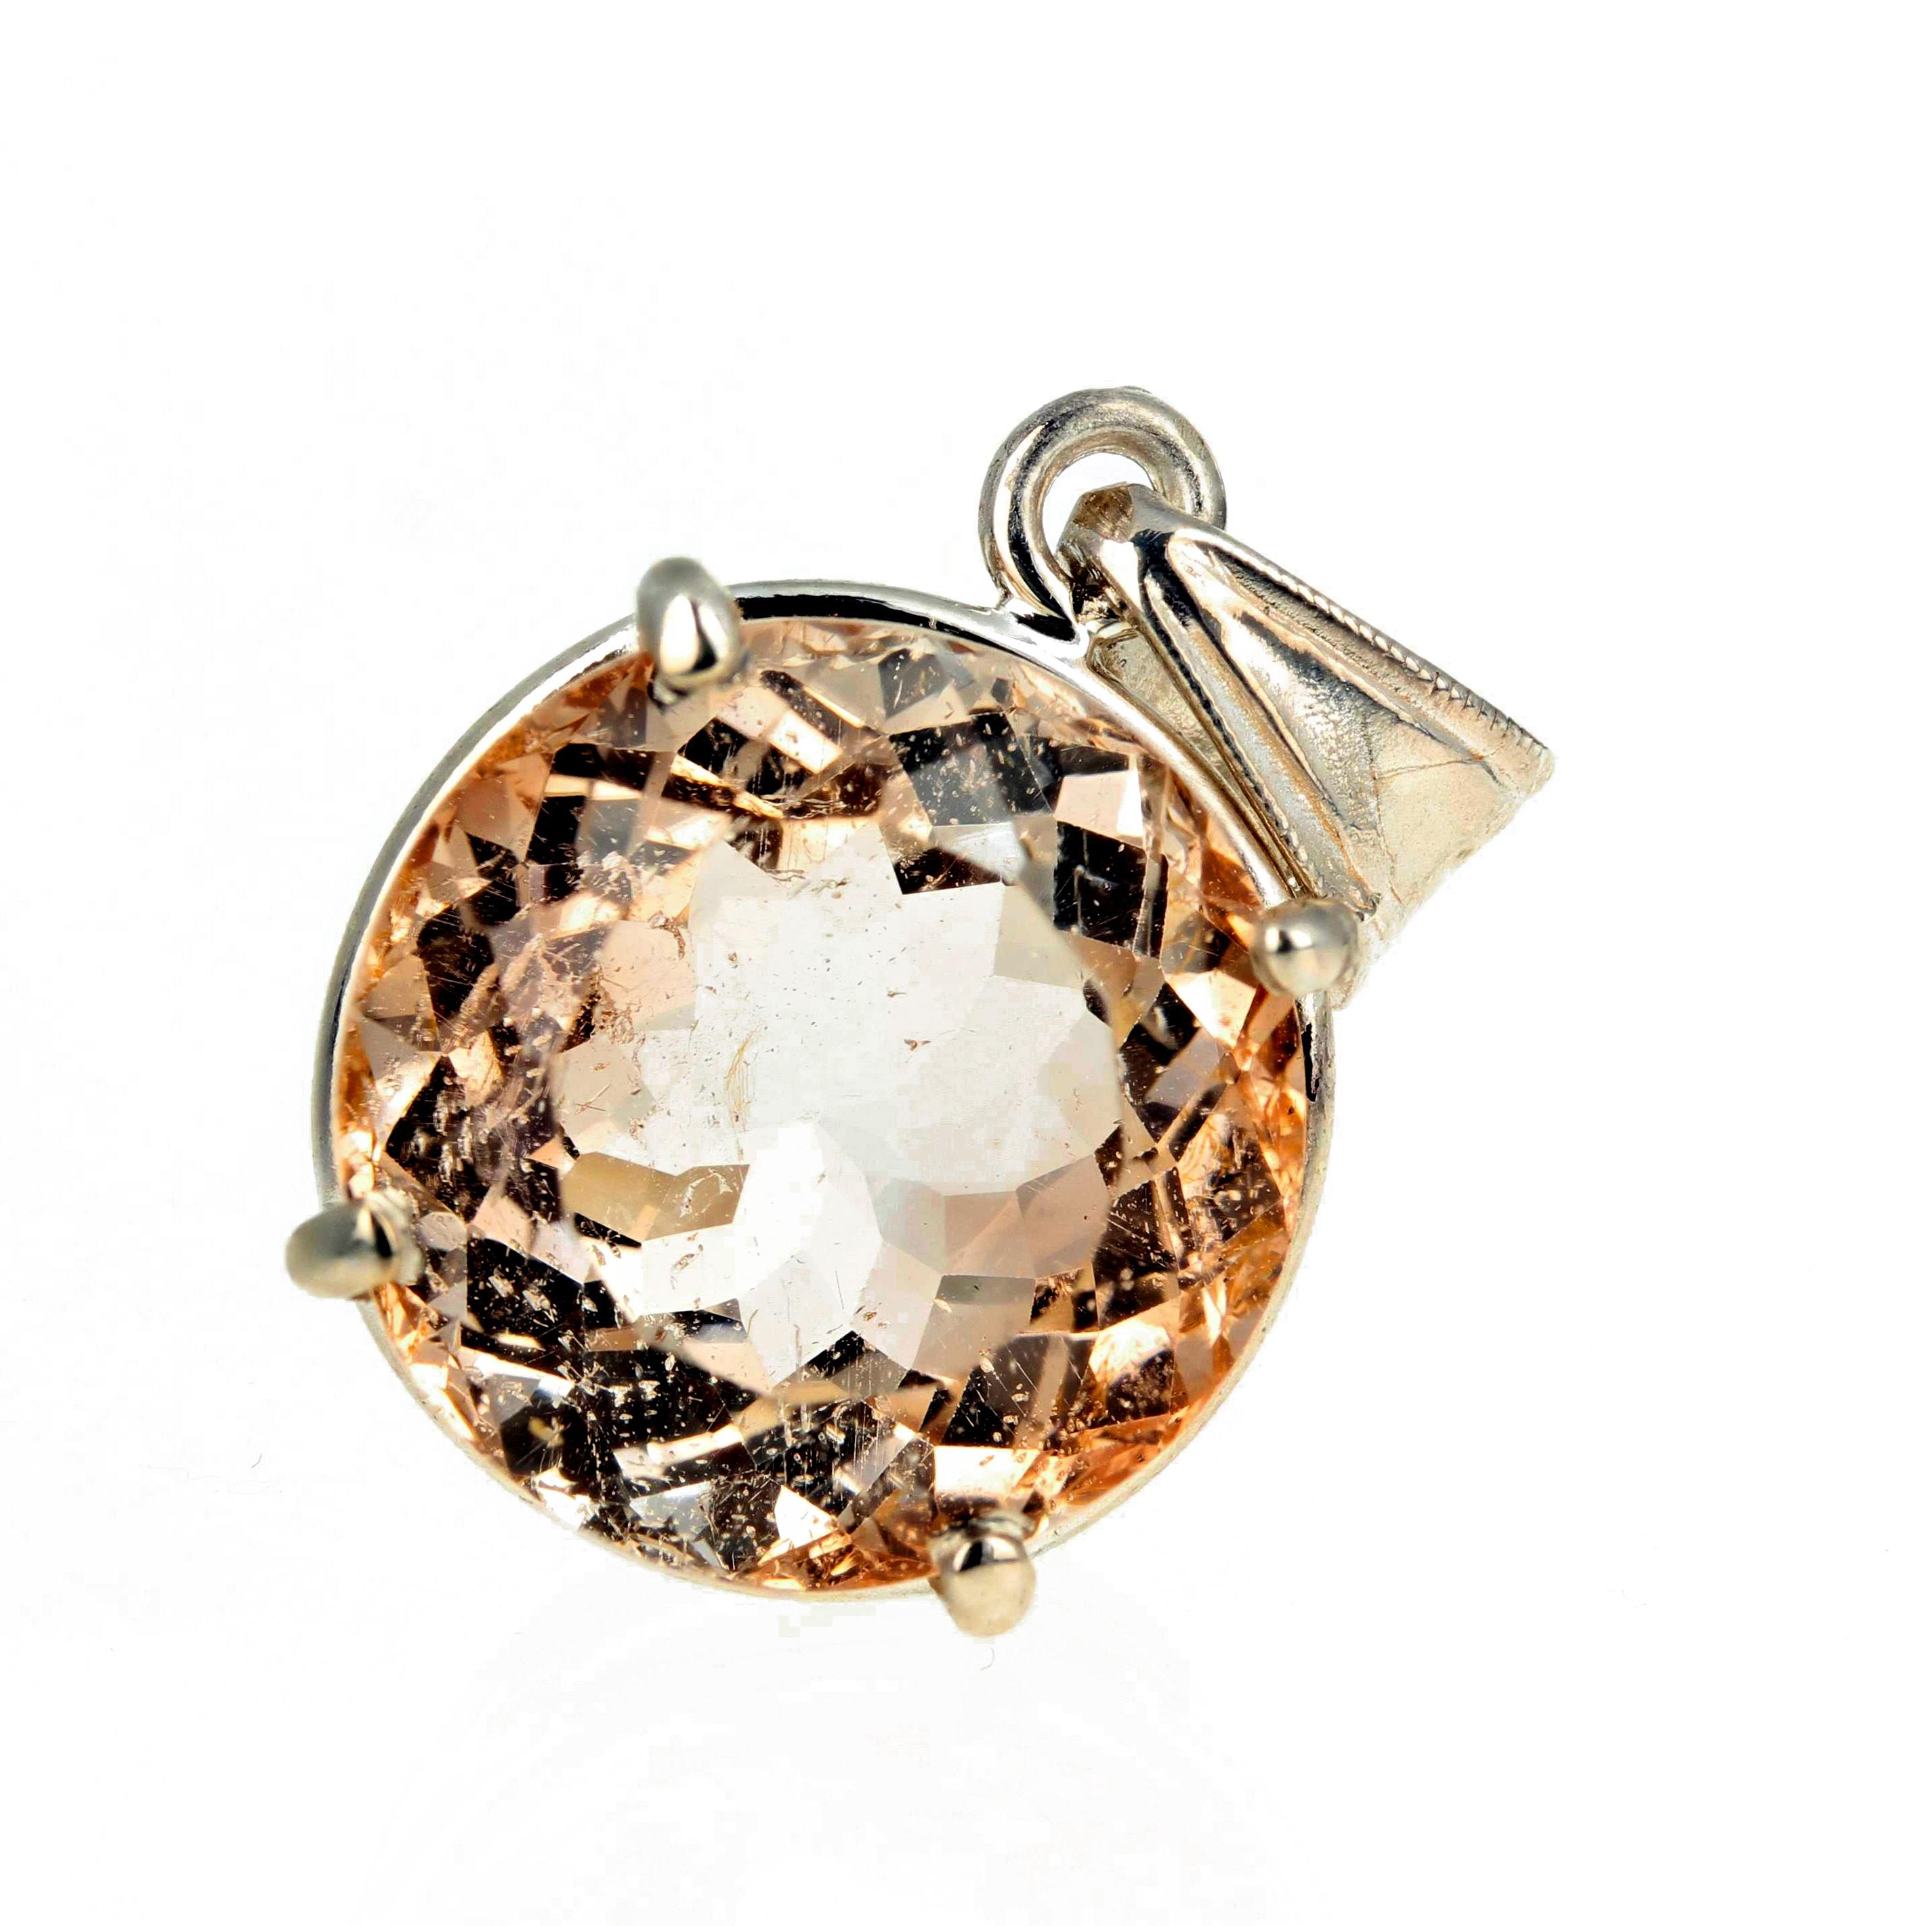 Women's or Men's Gemjunky Rare Fiery 16 Cts Blush Pink Color Morganite Sterling Silver Pendant